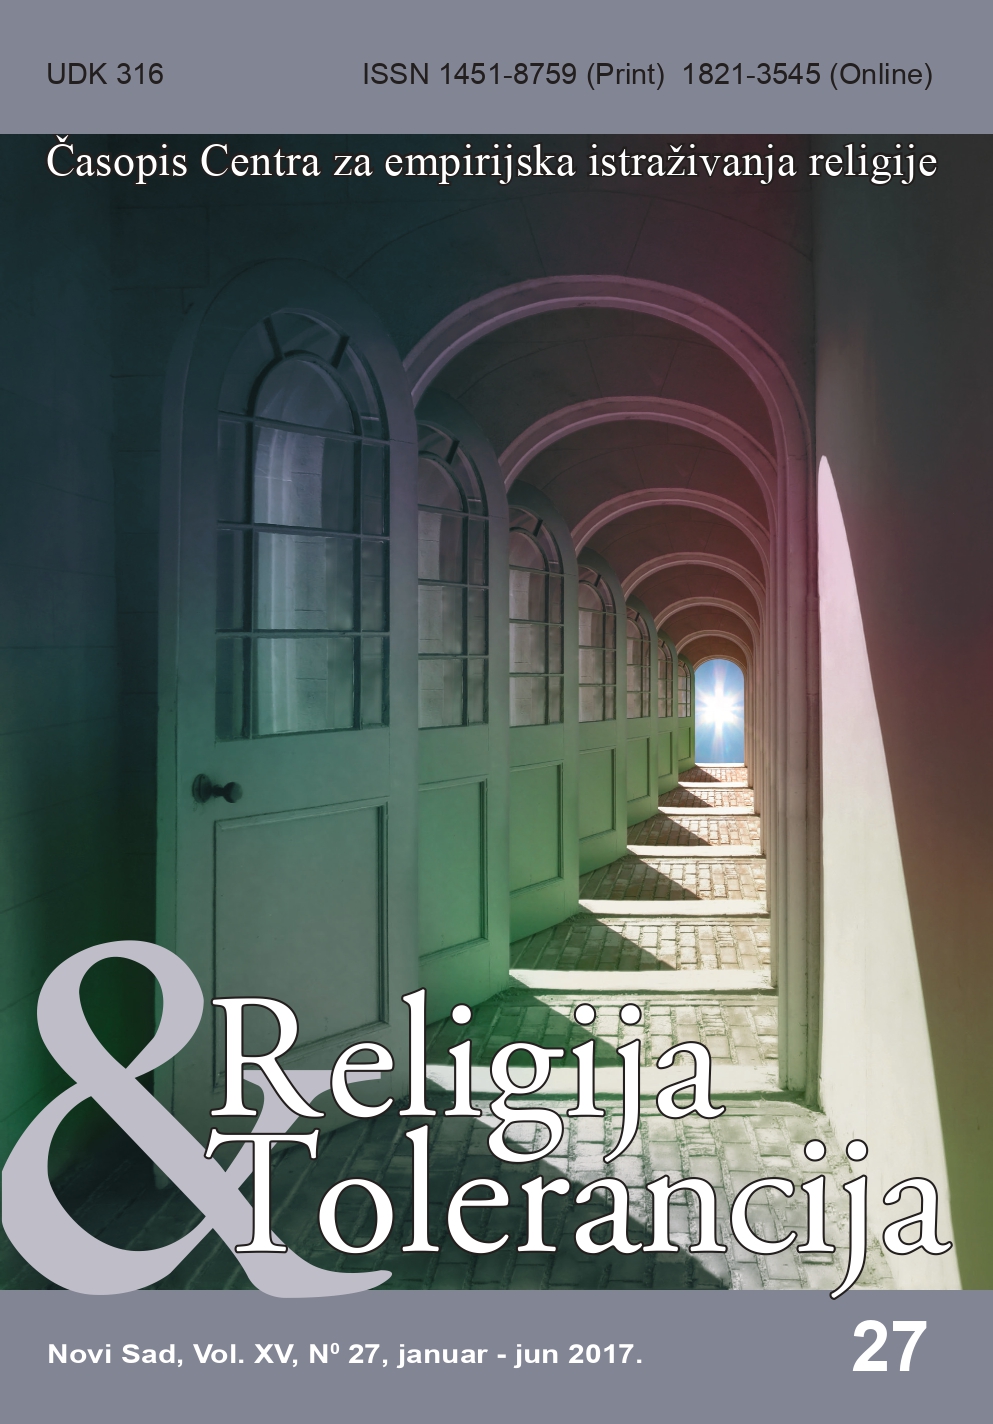 RELIGIOUS FUNDAMENTALISM: RETURN TO TRADITION VIA MODERN MEANS Cover Image